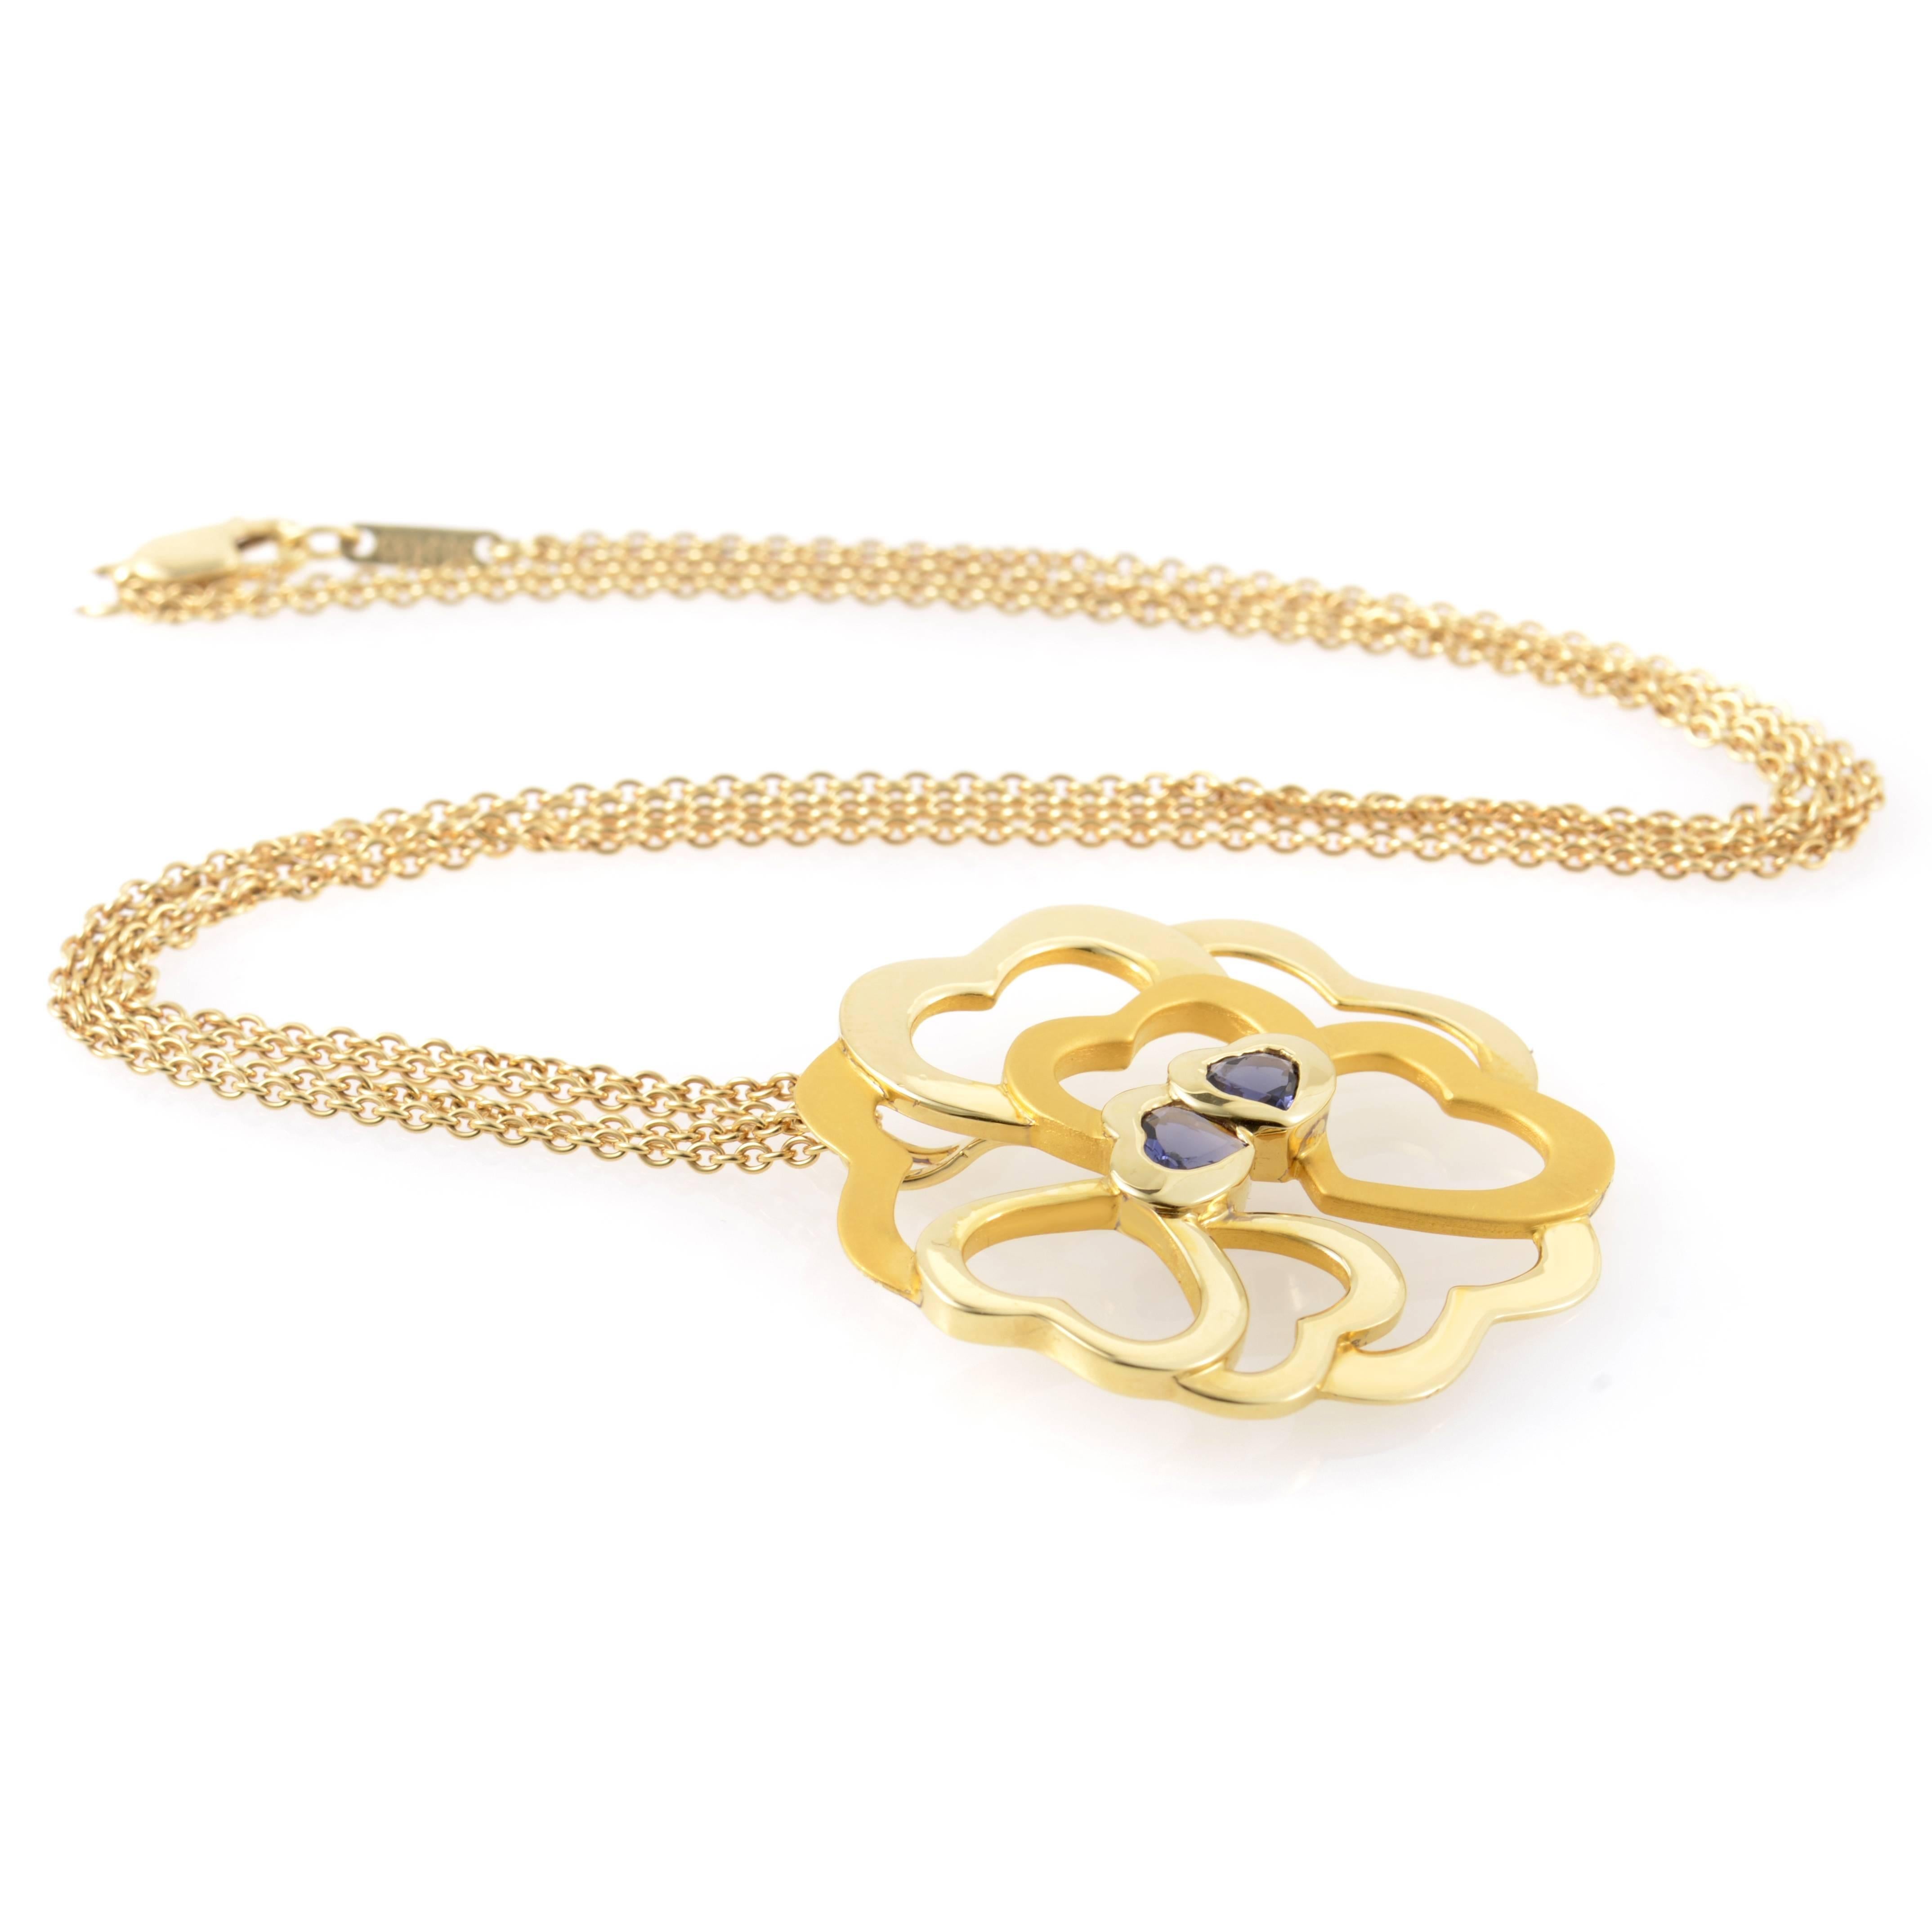 This pendant necklace from Carrera y Carrera has a festive and sumptuous design. The necklace is made of 18K yellow gold and features a pendant that depicts a cluster of hearts set with ~.64ct of iolite.